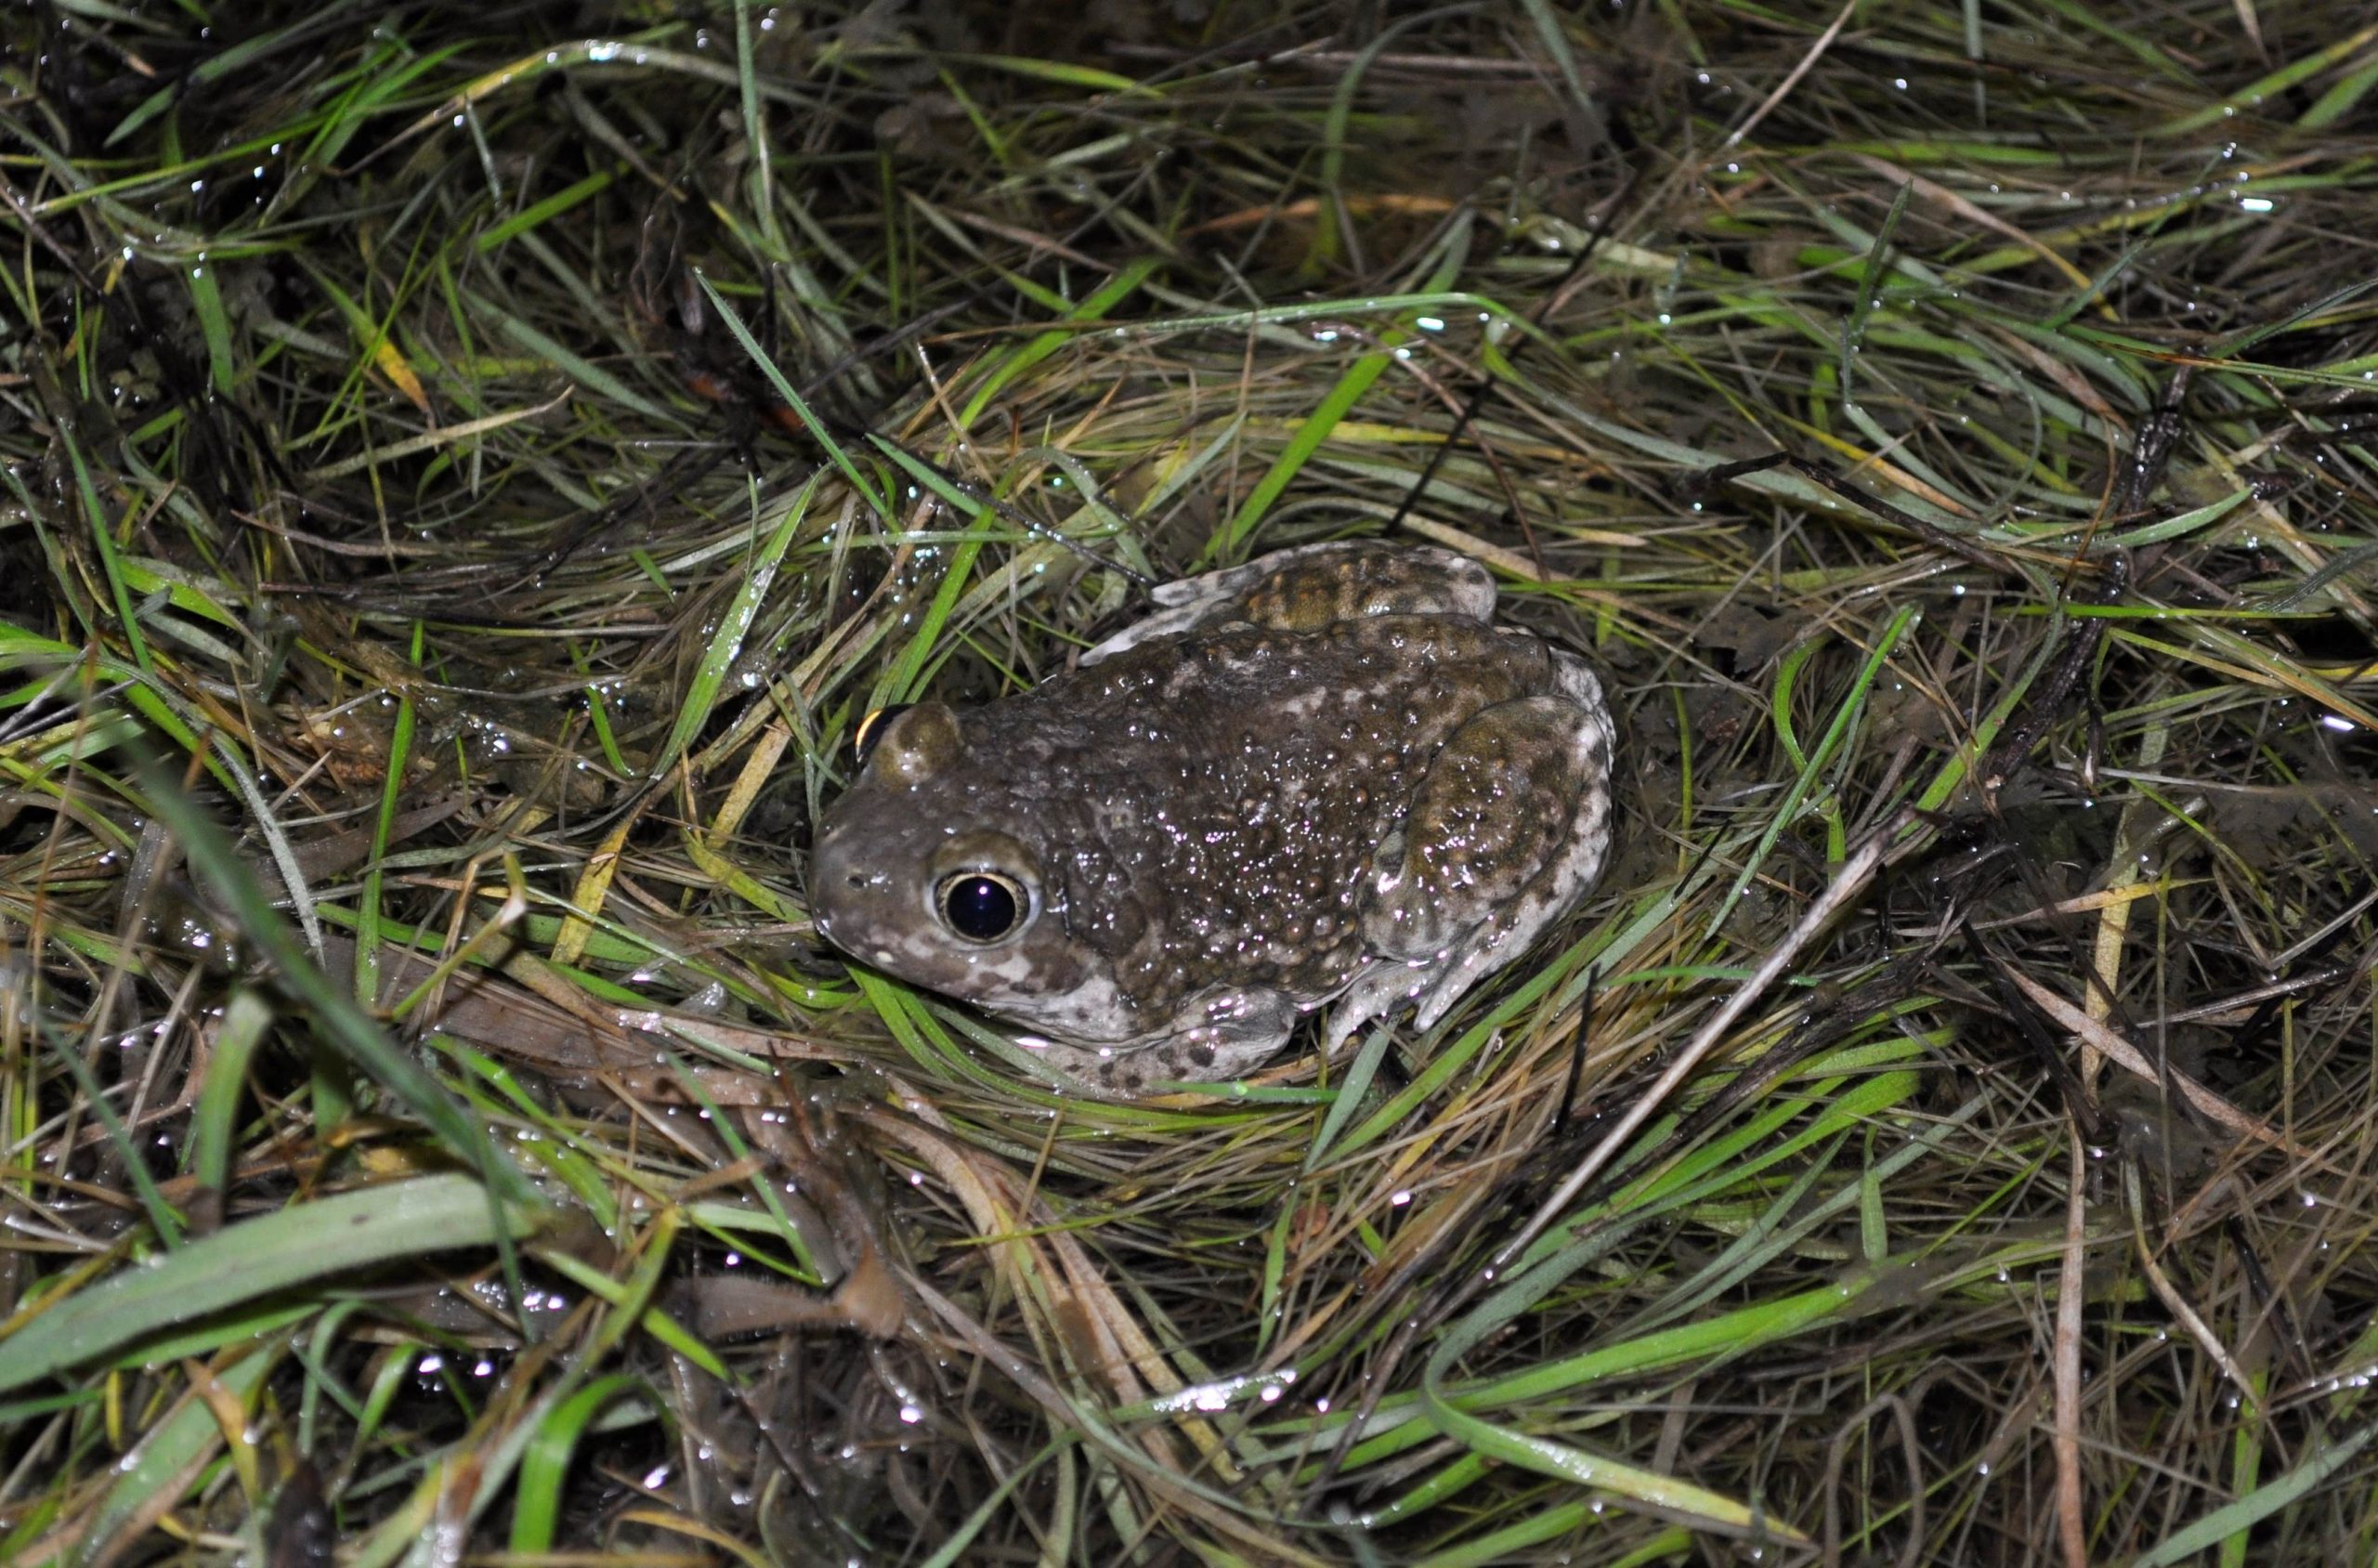 Presentation: Frogs and Toads - The Good, the Bad, and the Ugly